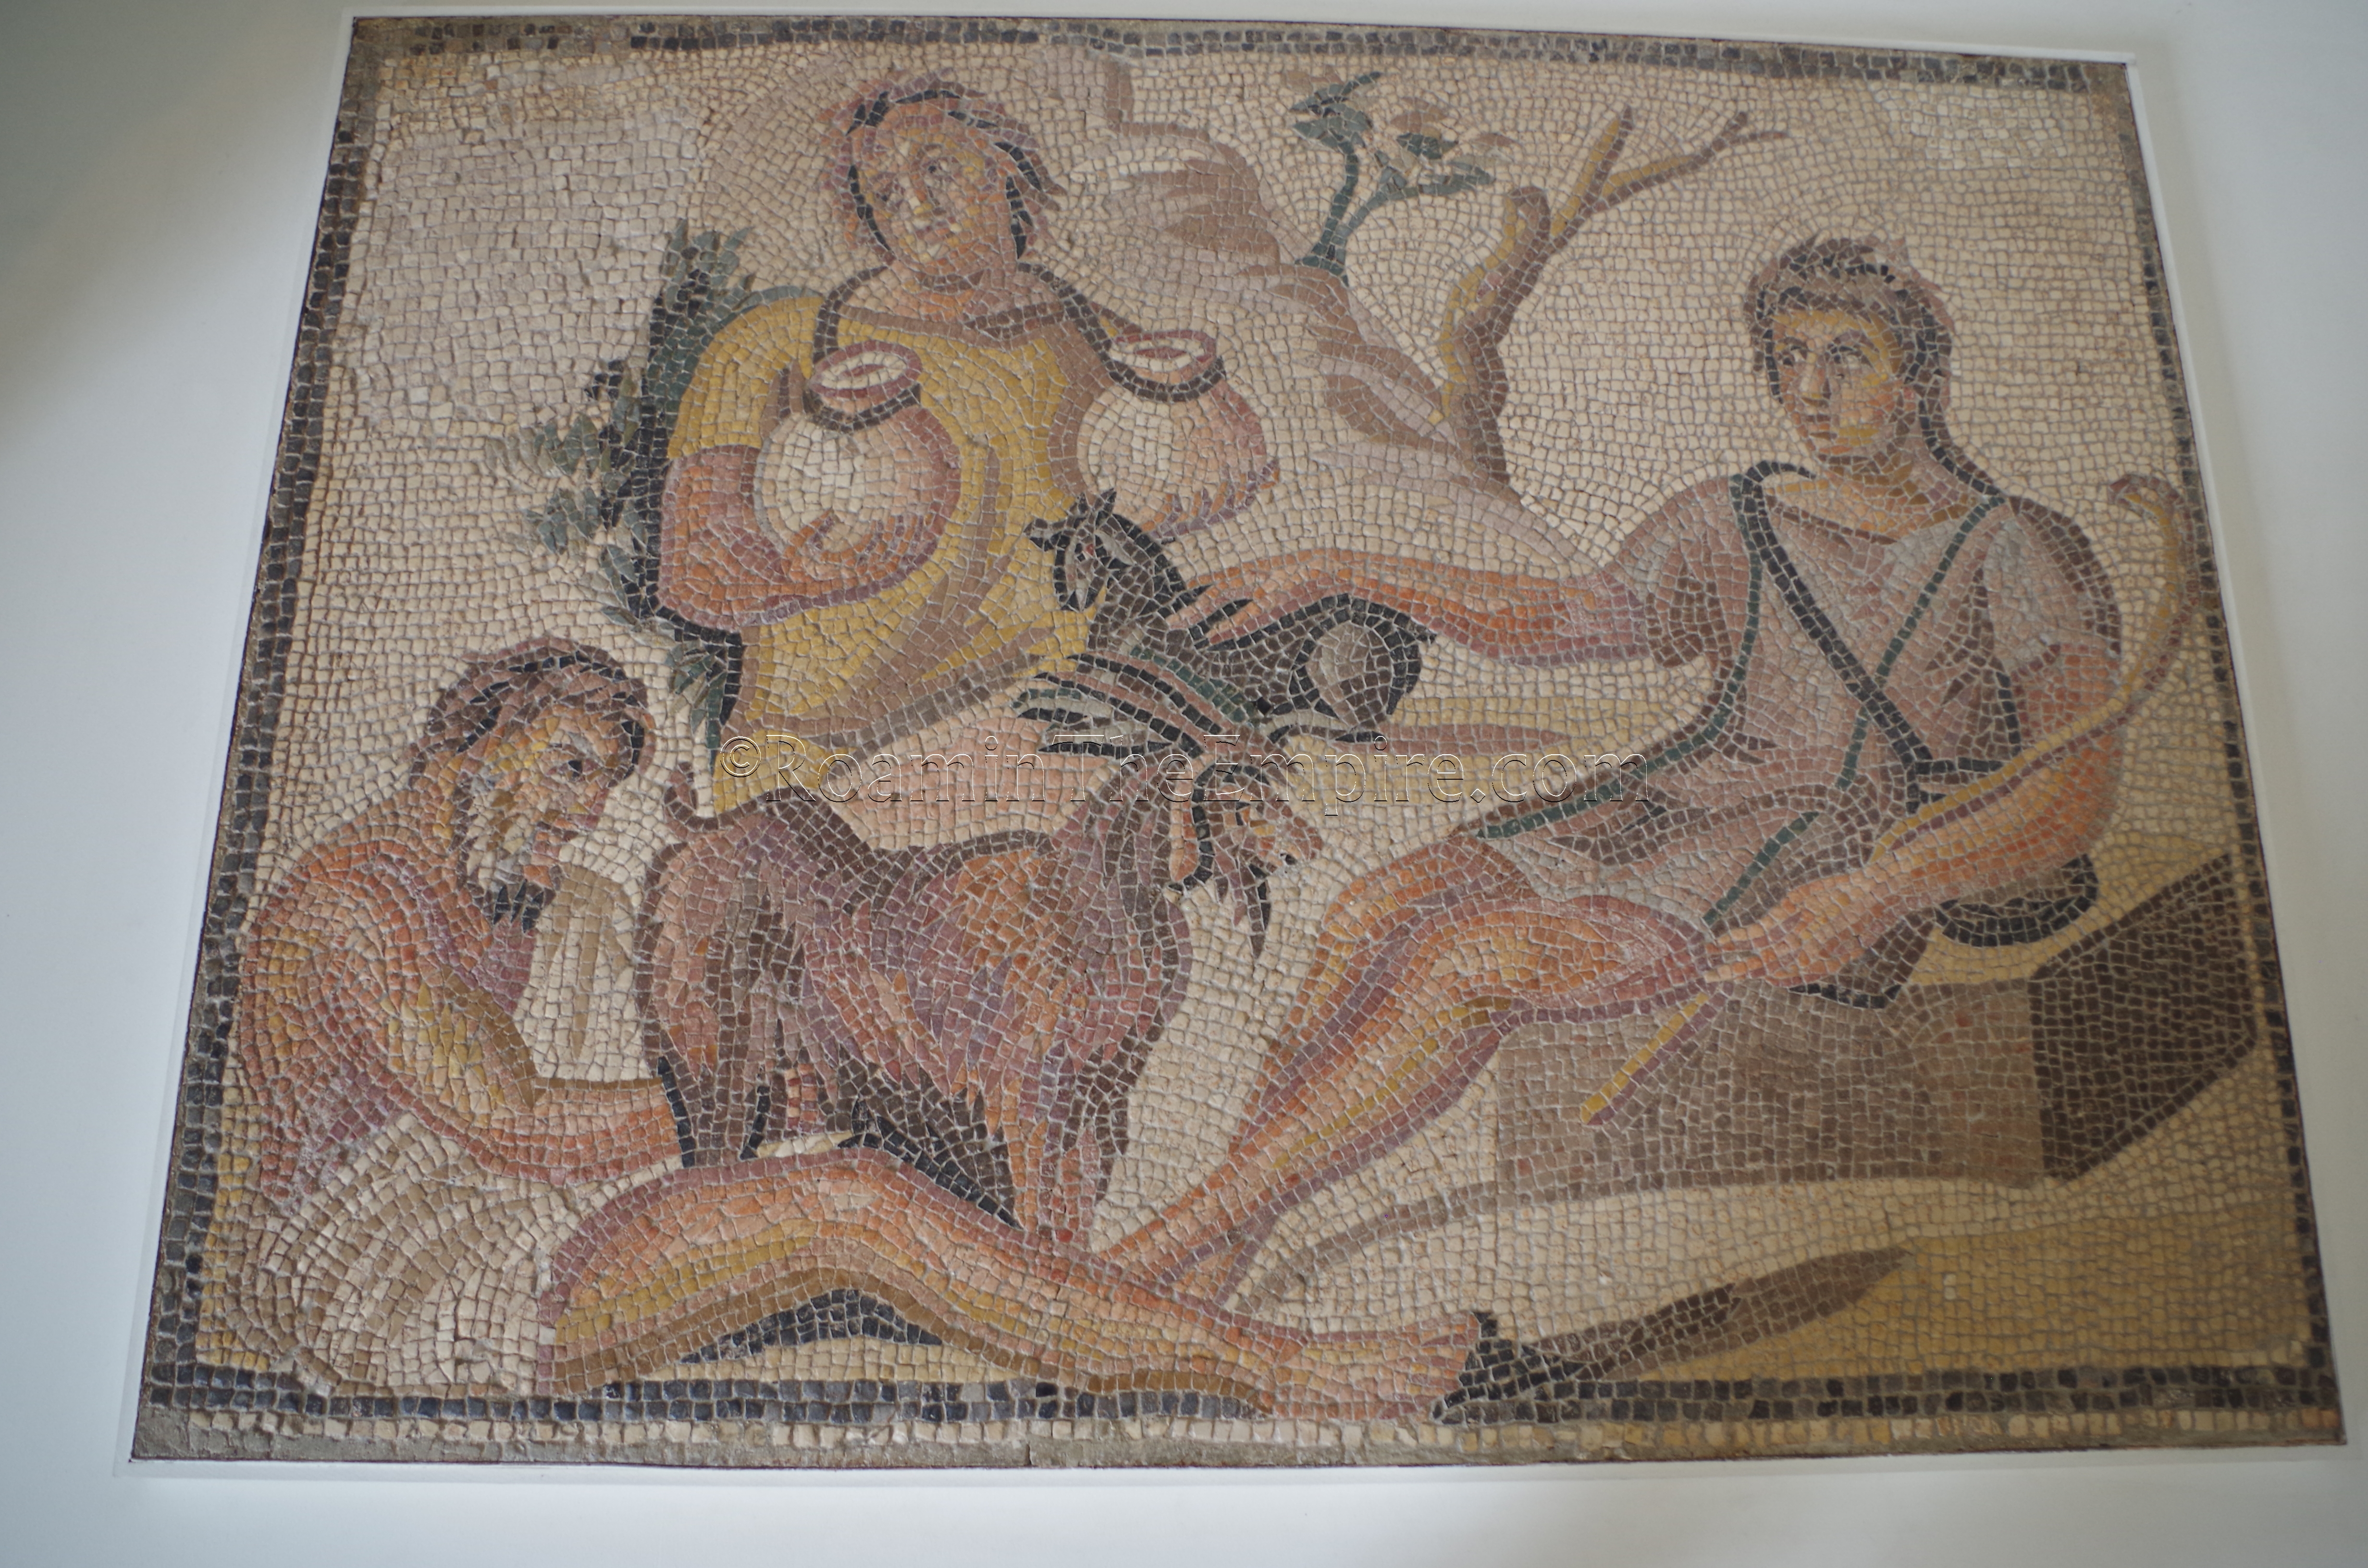 Mosaic of a pastoral scene dated to the beginning of the 3rd century CE. Displayed in the Musée d'Art et d'Histoire. Genava. Geneva.